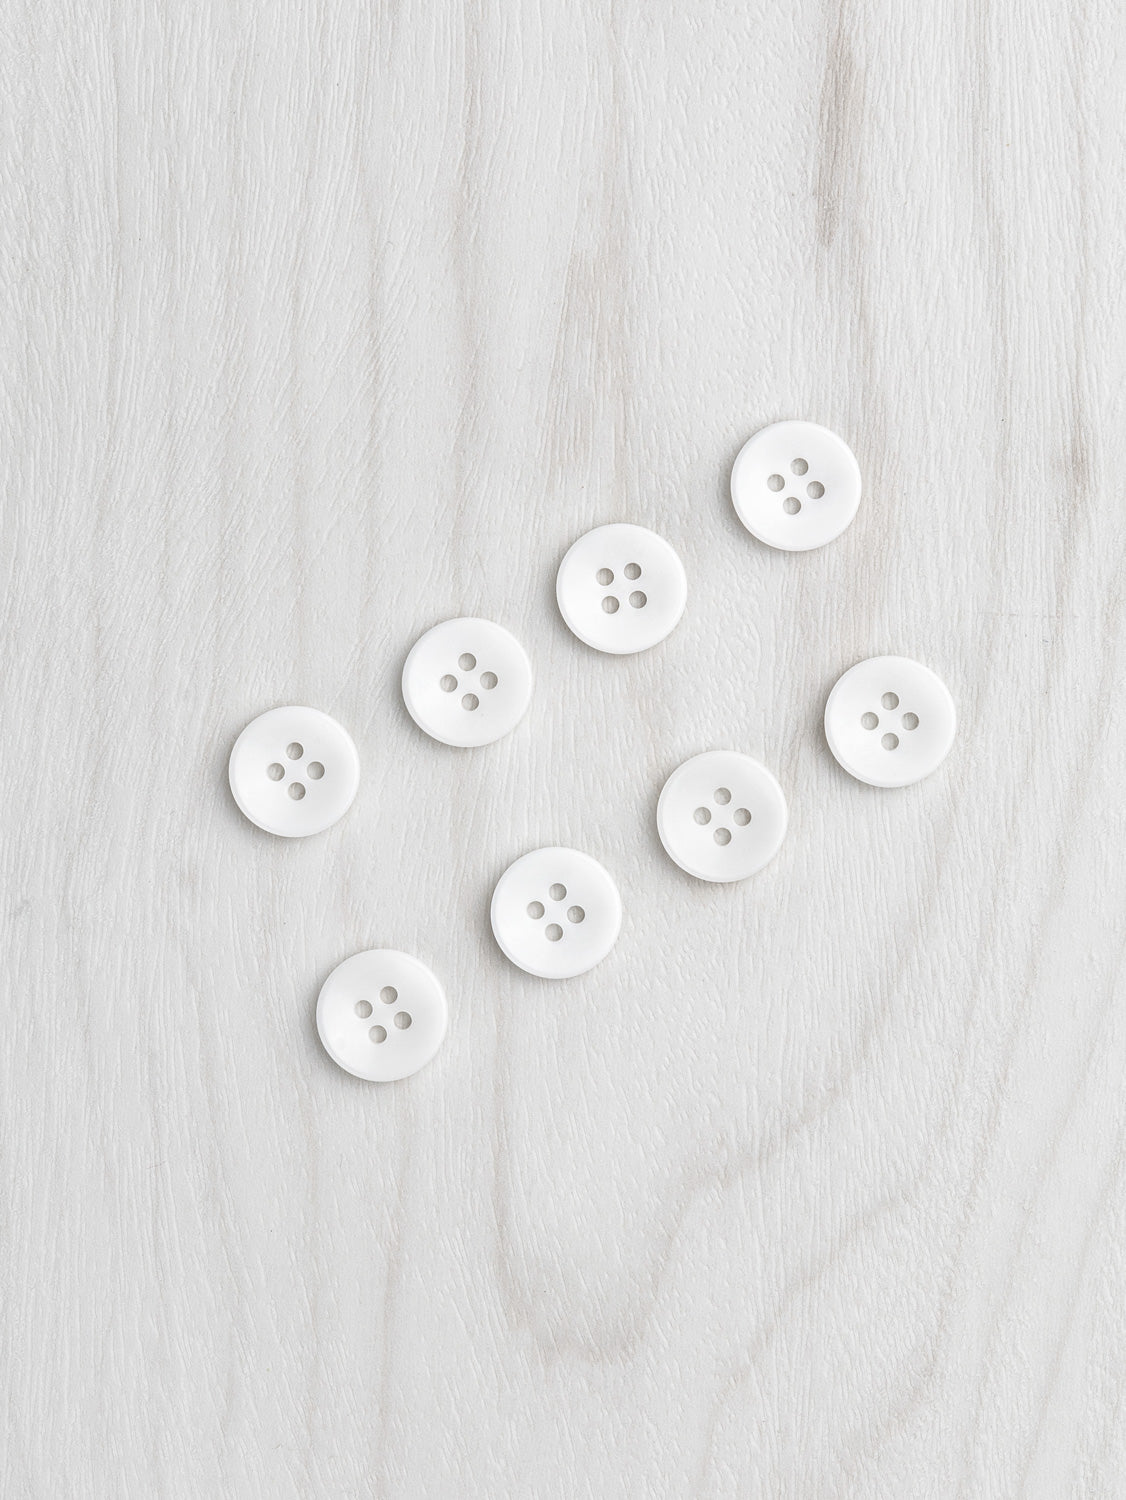 N-BUT021-001-Corozo-nut-button-4-hole-12mm-1_2-inch-8-pack-White-Core-Fabrics.jpg